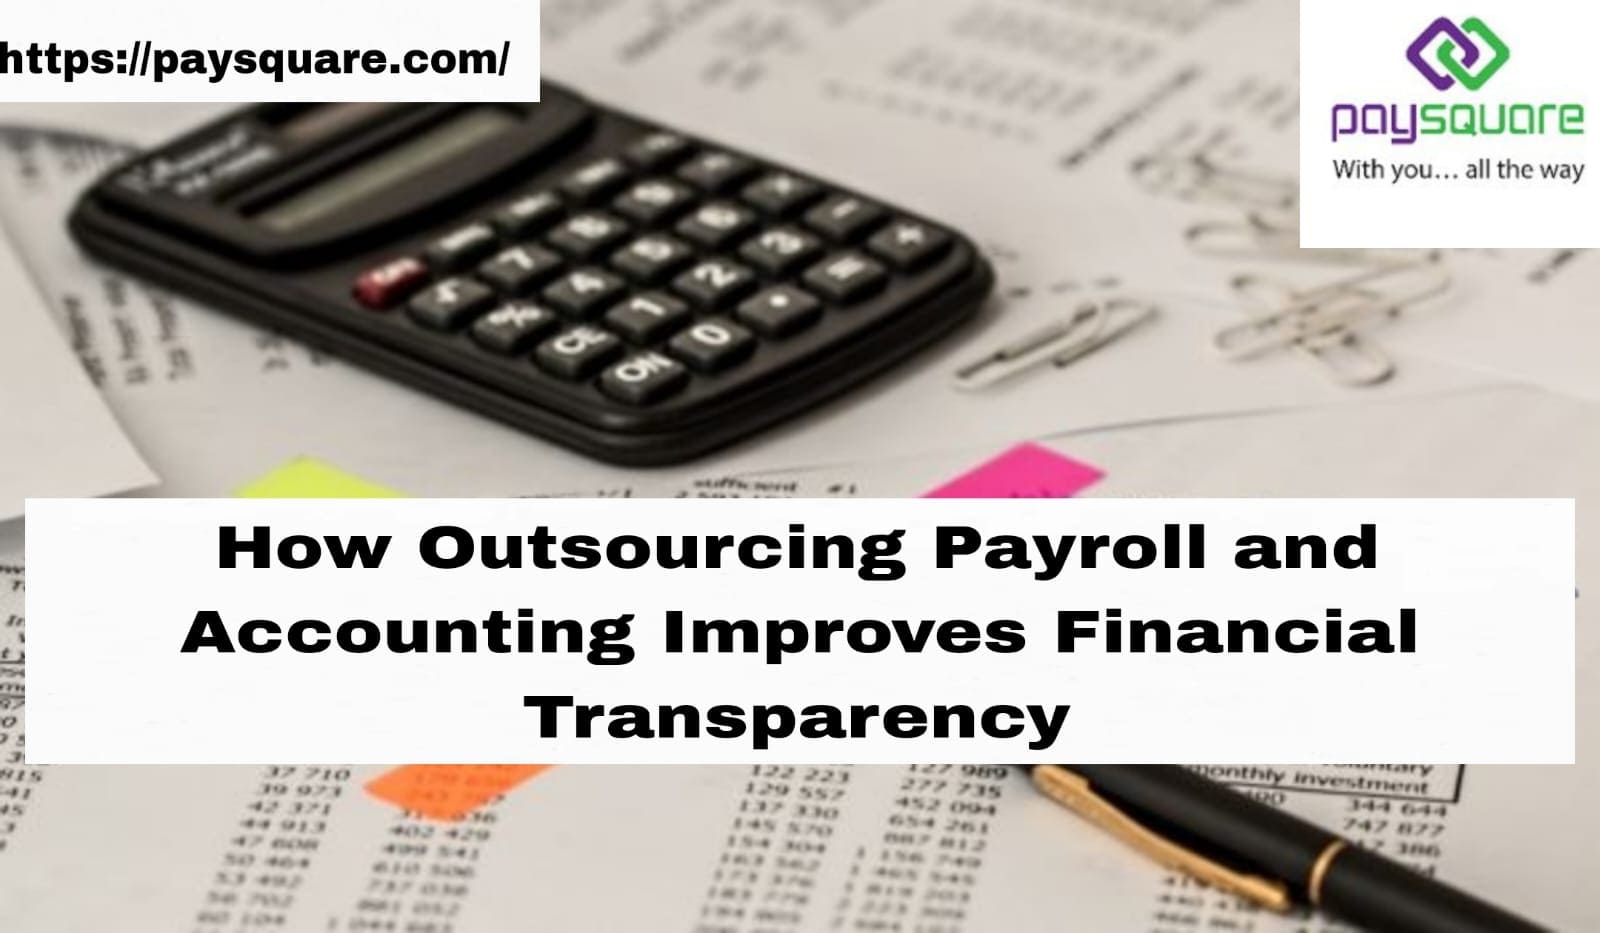 How Outsourcing Payroll and Accounting Improves Financial Transparency (1)